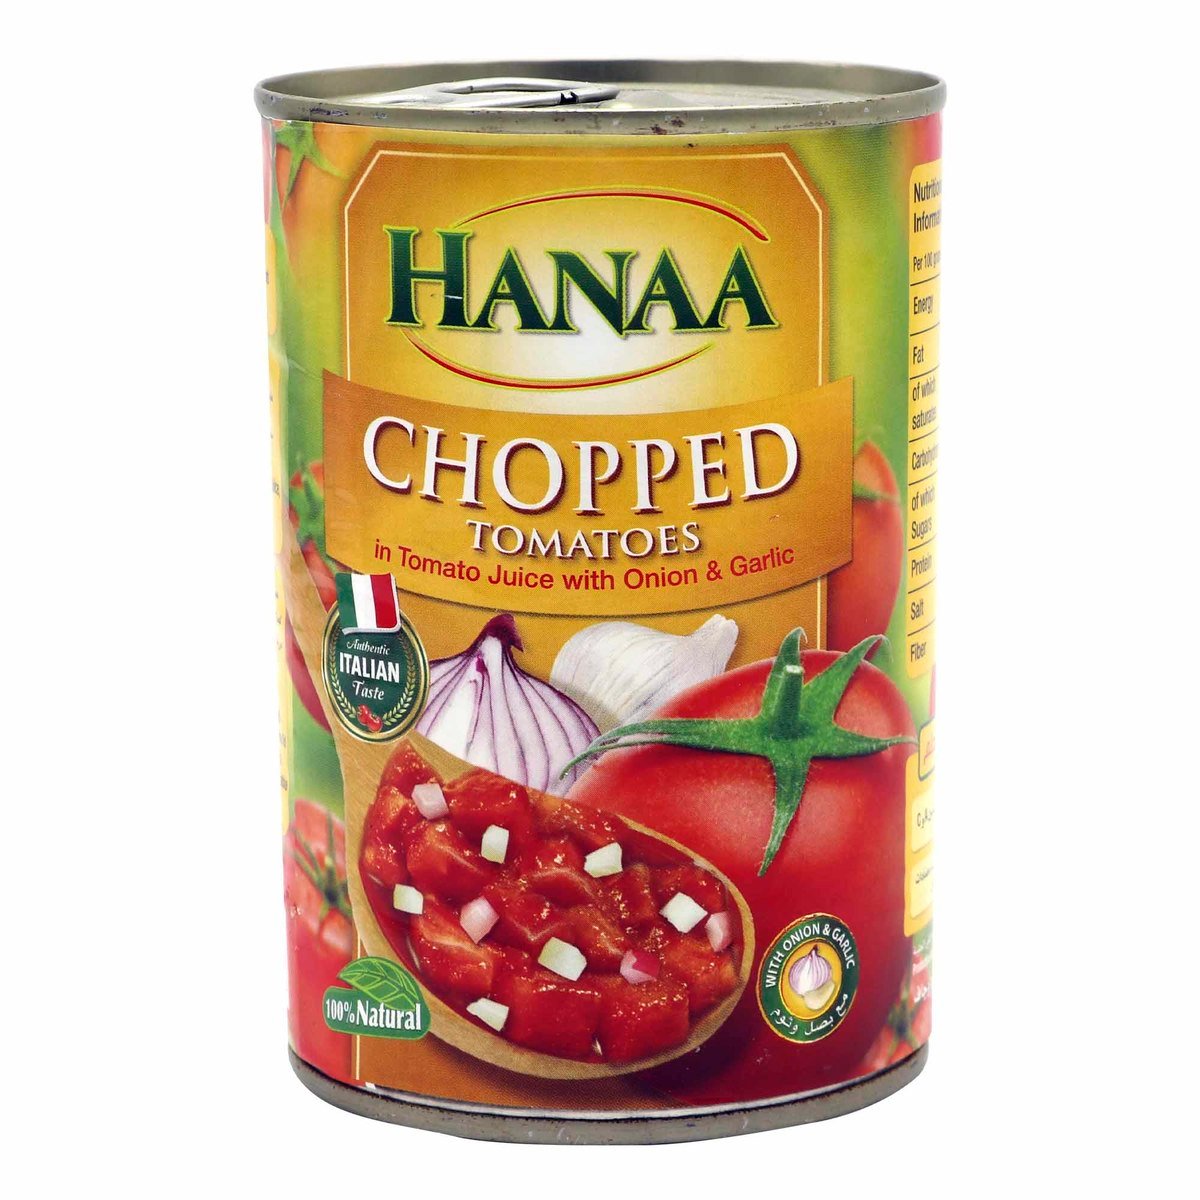 Hanaa Chopped Tomatoes In Tomato Juice With Onion And Garlic 400g